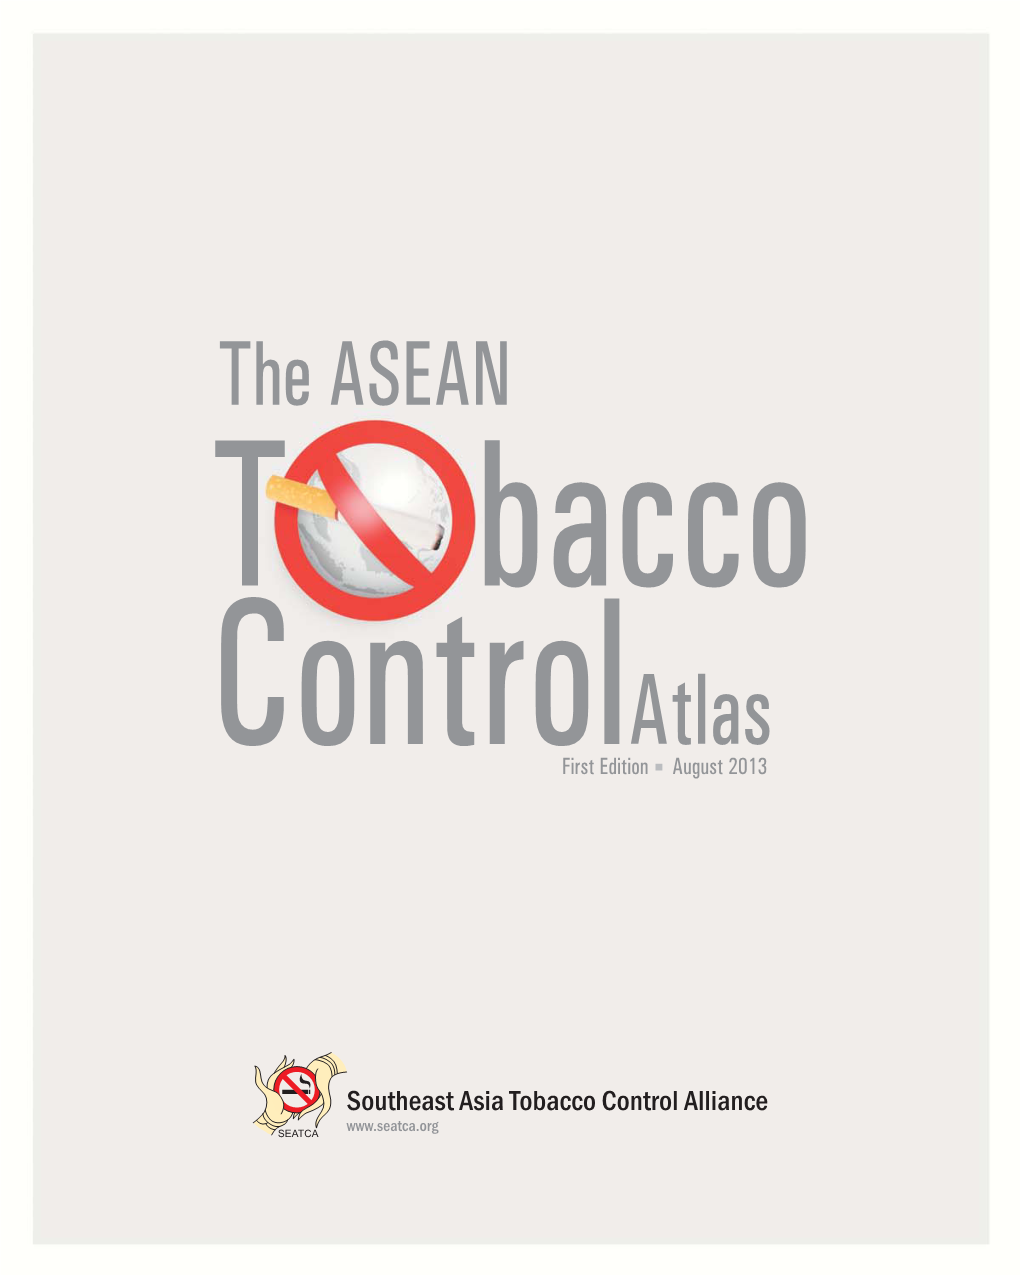 The ASEAN T Bacco Controlatlas First Edition August 2013